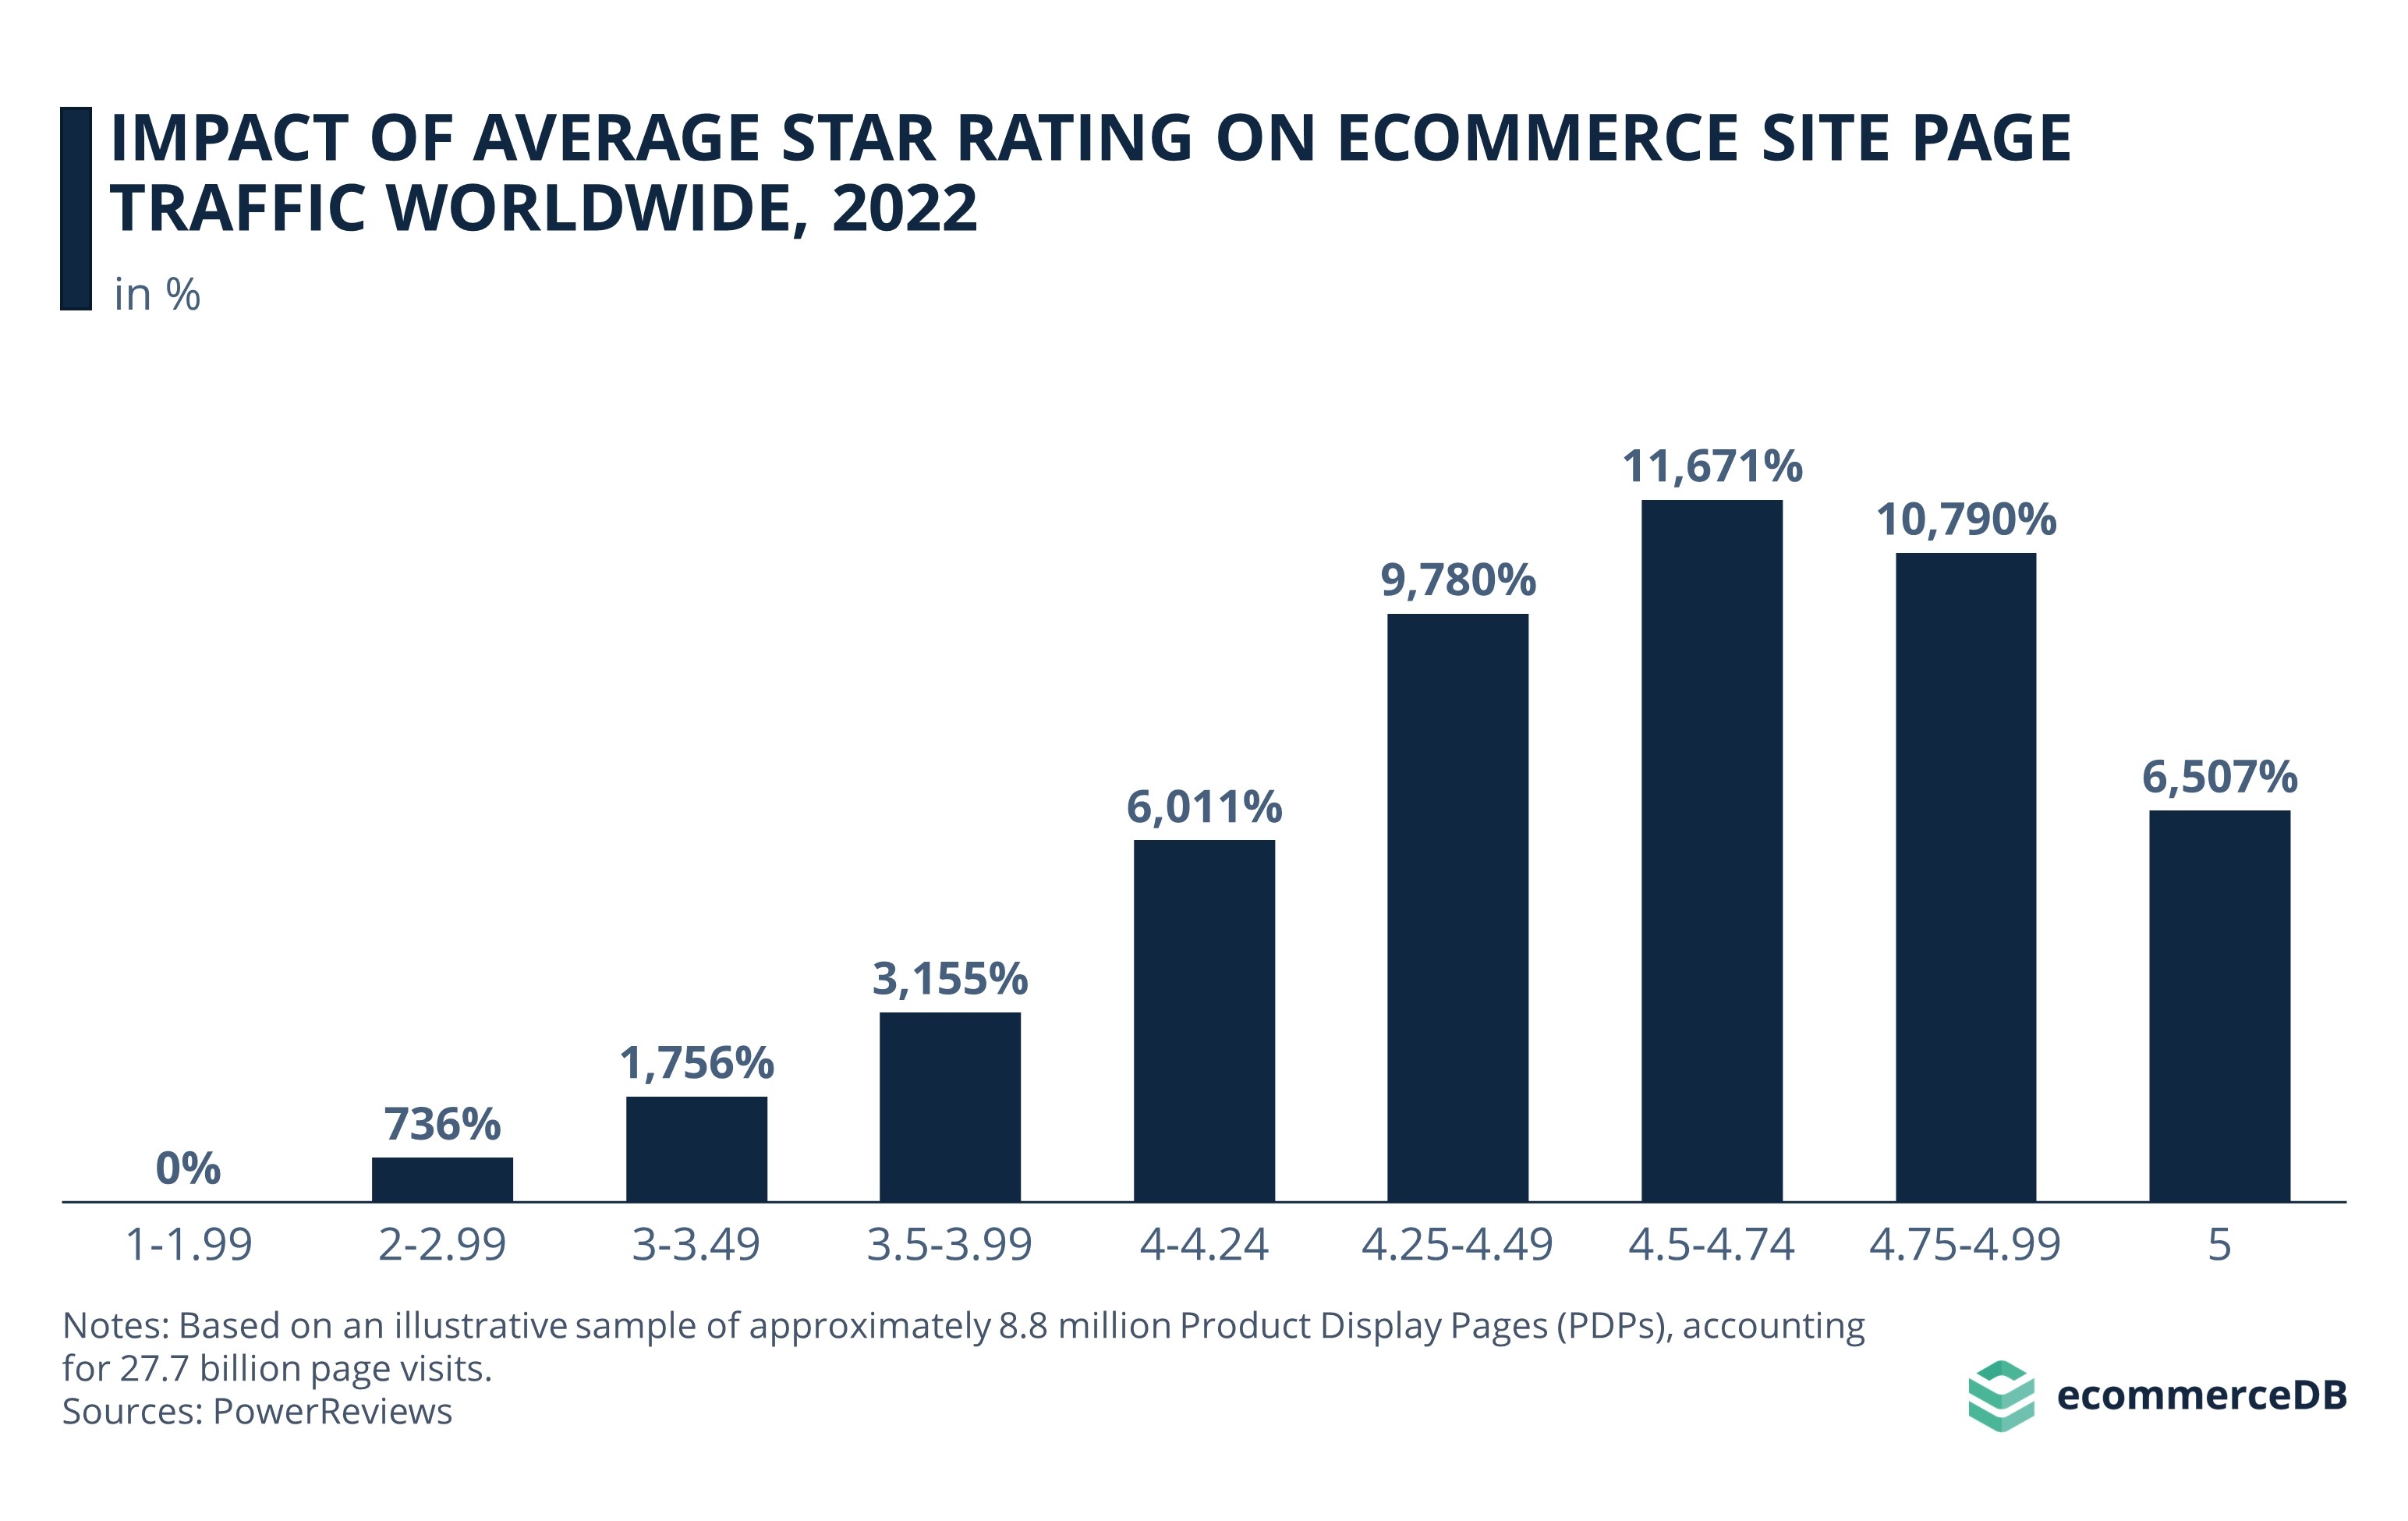 Impact of Average Star Rating on eCommerce Site Page Traffic Worldwide, 2022